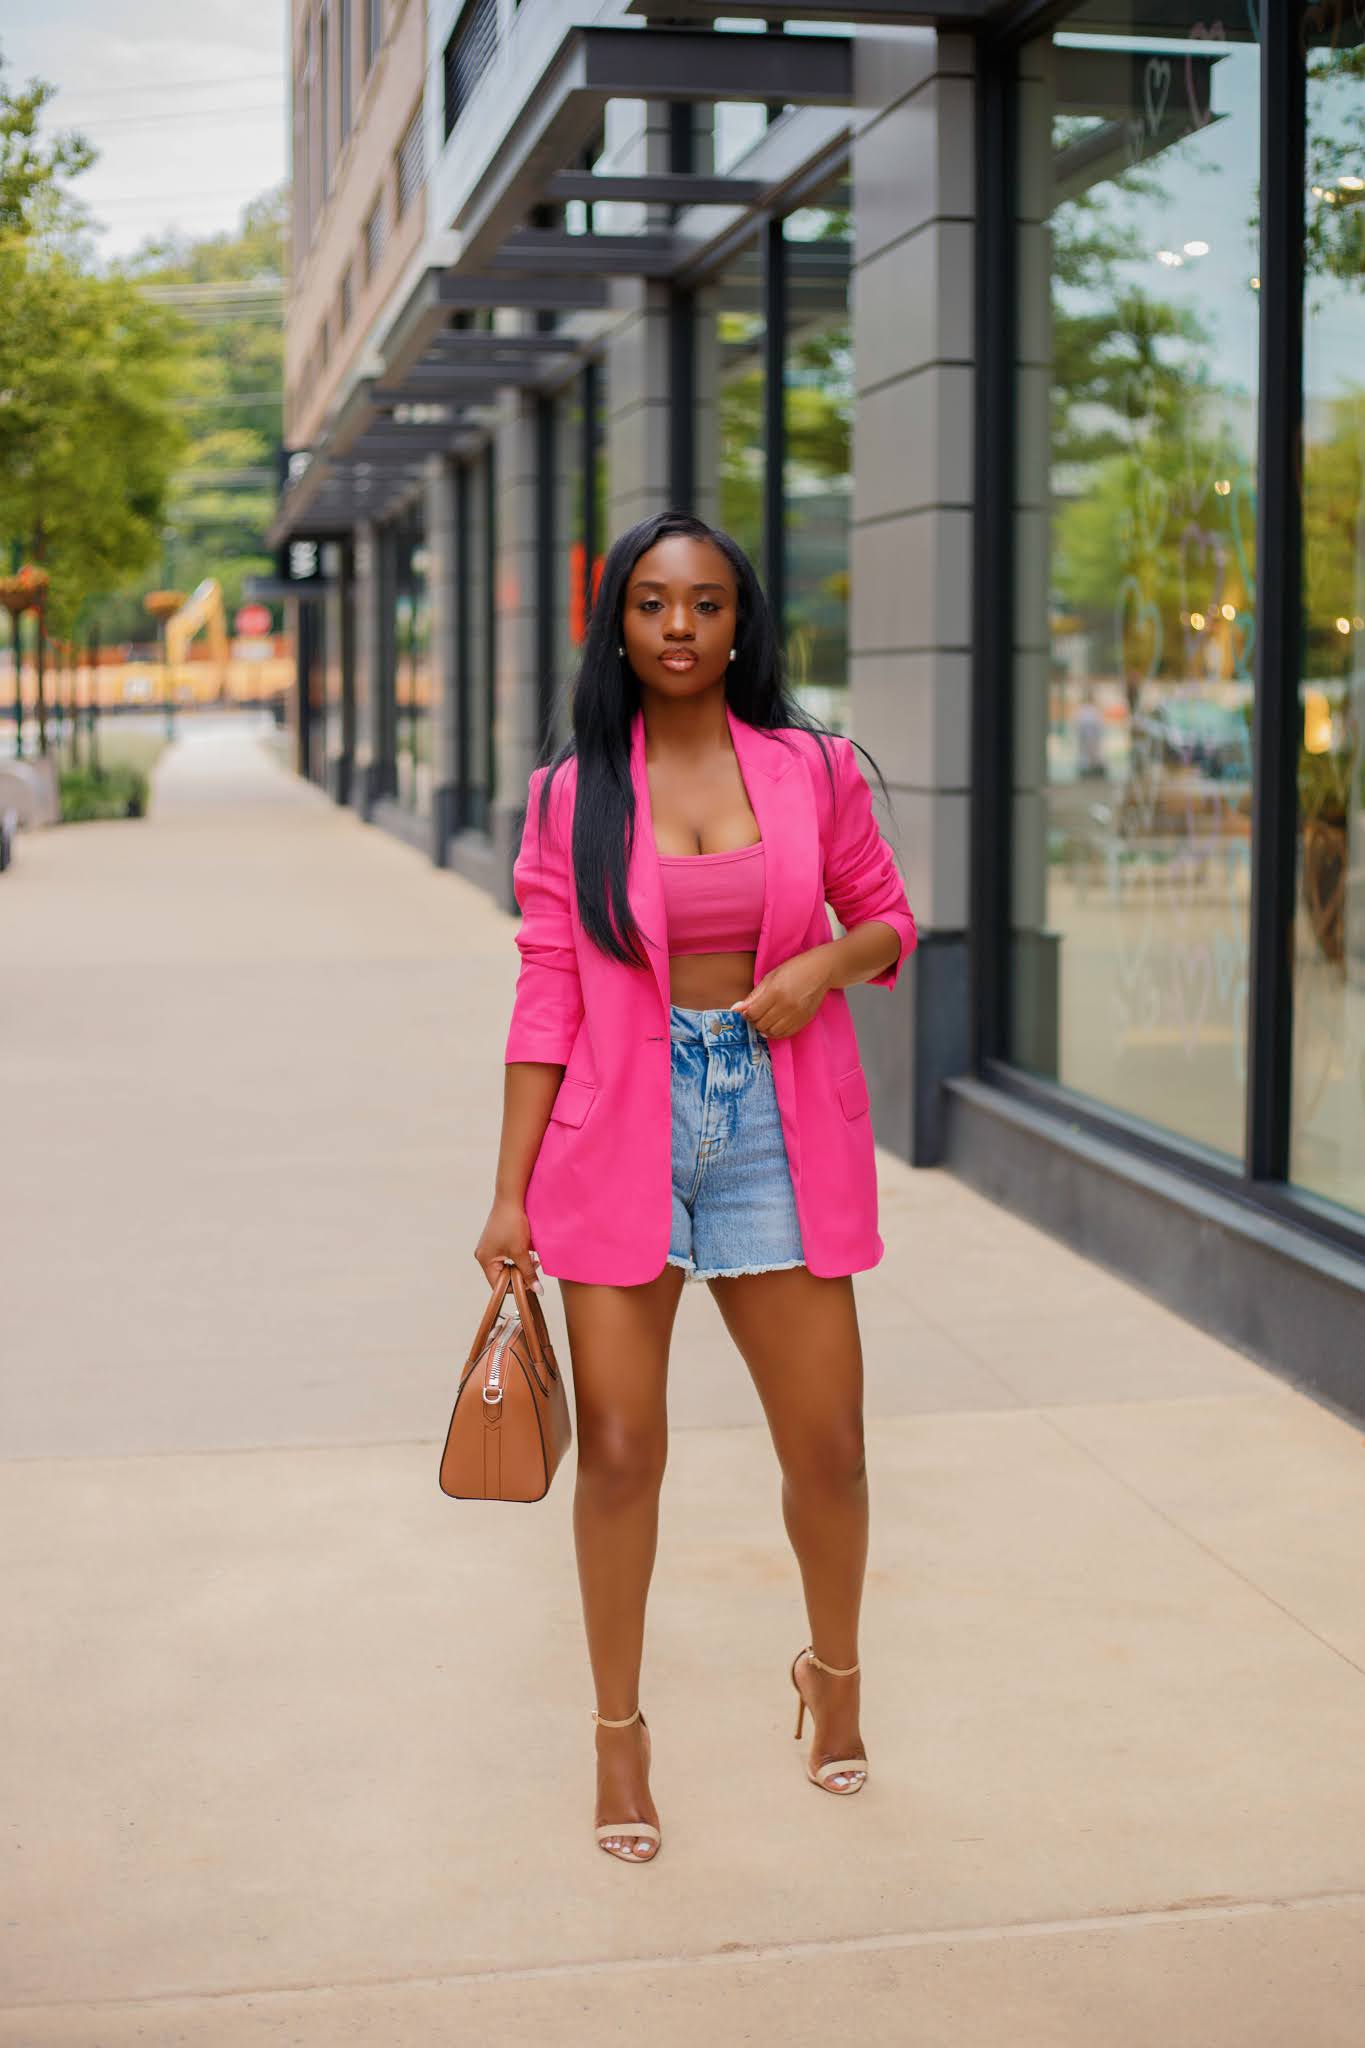 Summer Must Haves: Crop Top and Blazer | Prissysavvy